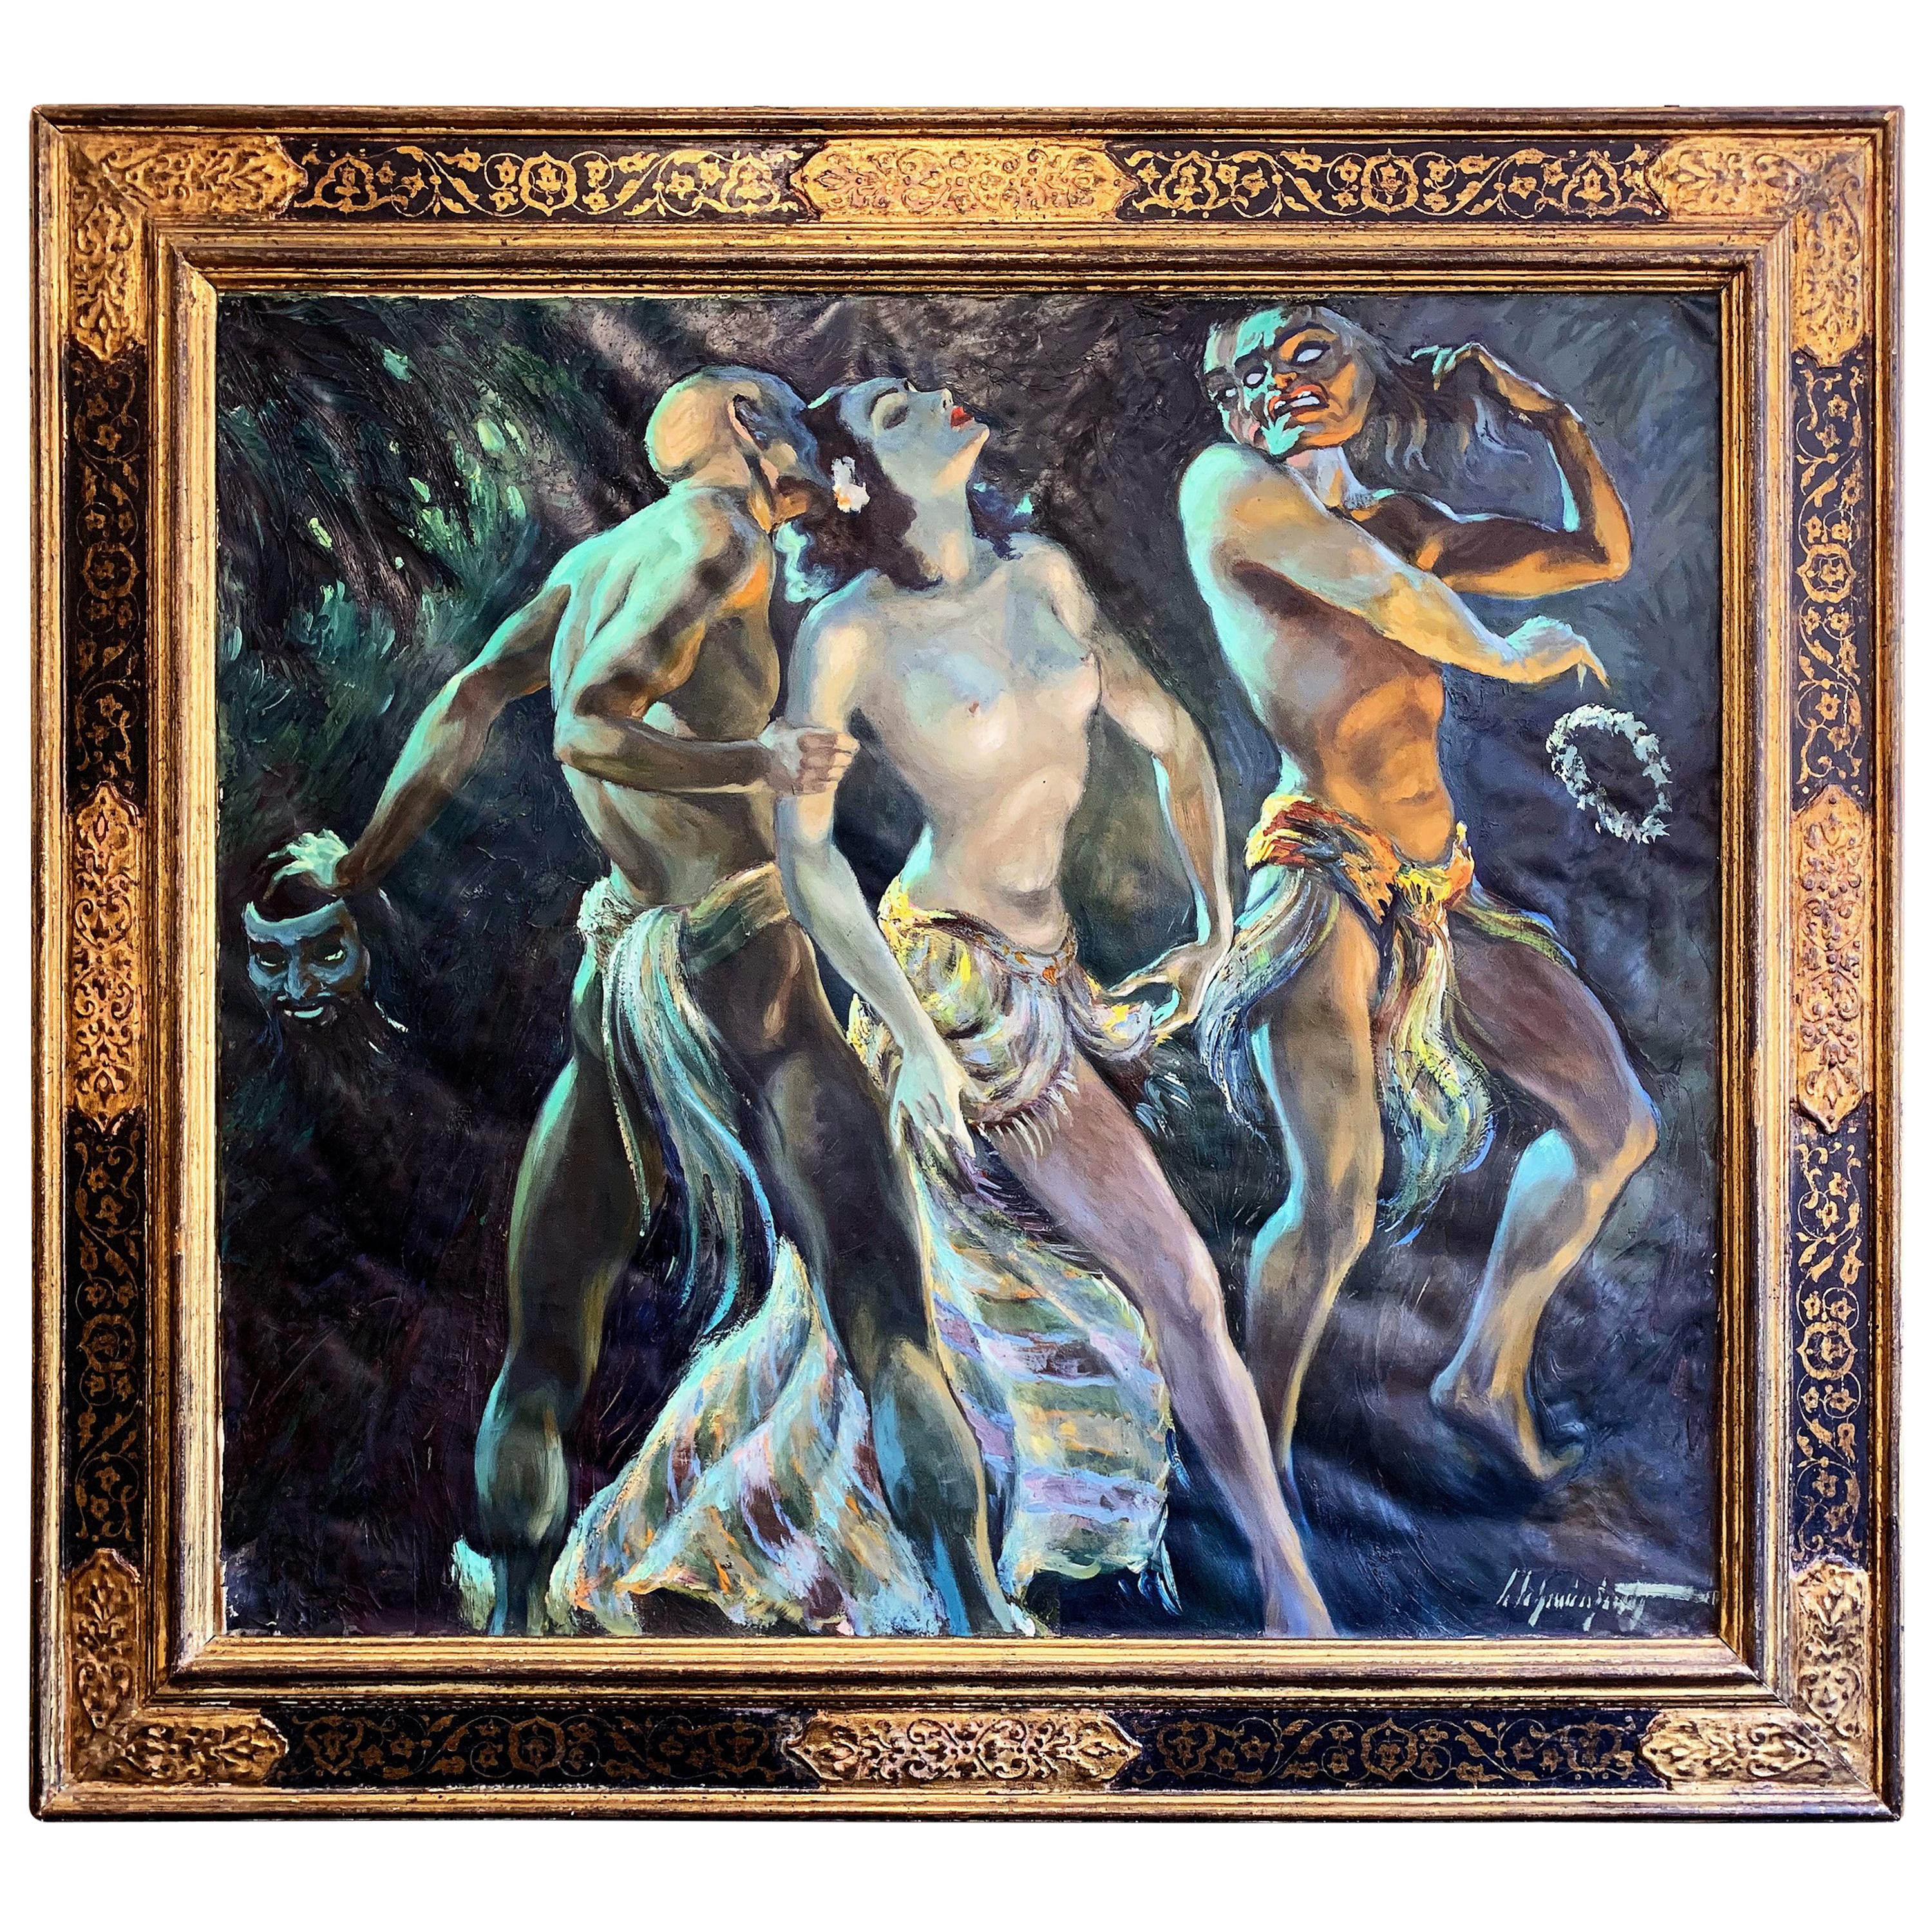 "Masked Dance, " Fabulous French Art Deco Painting Influenced by Ballet Russes